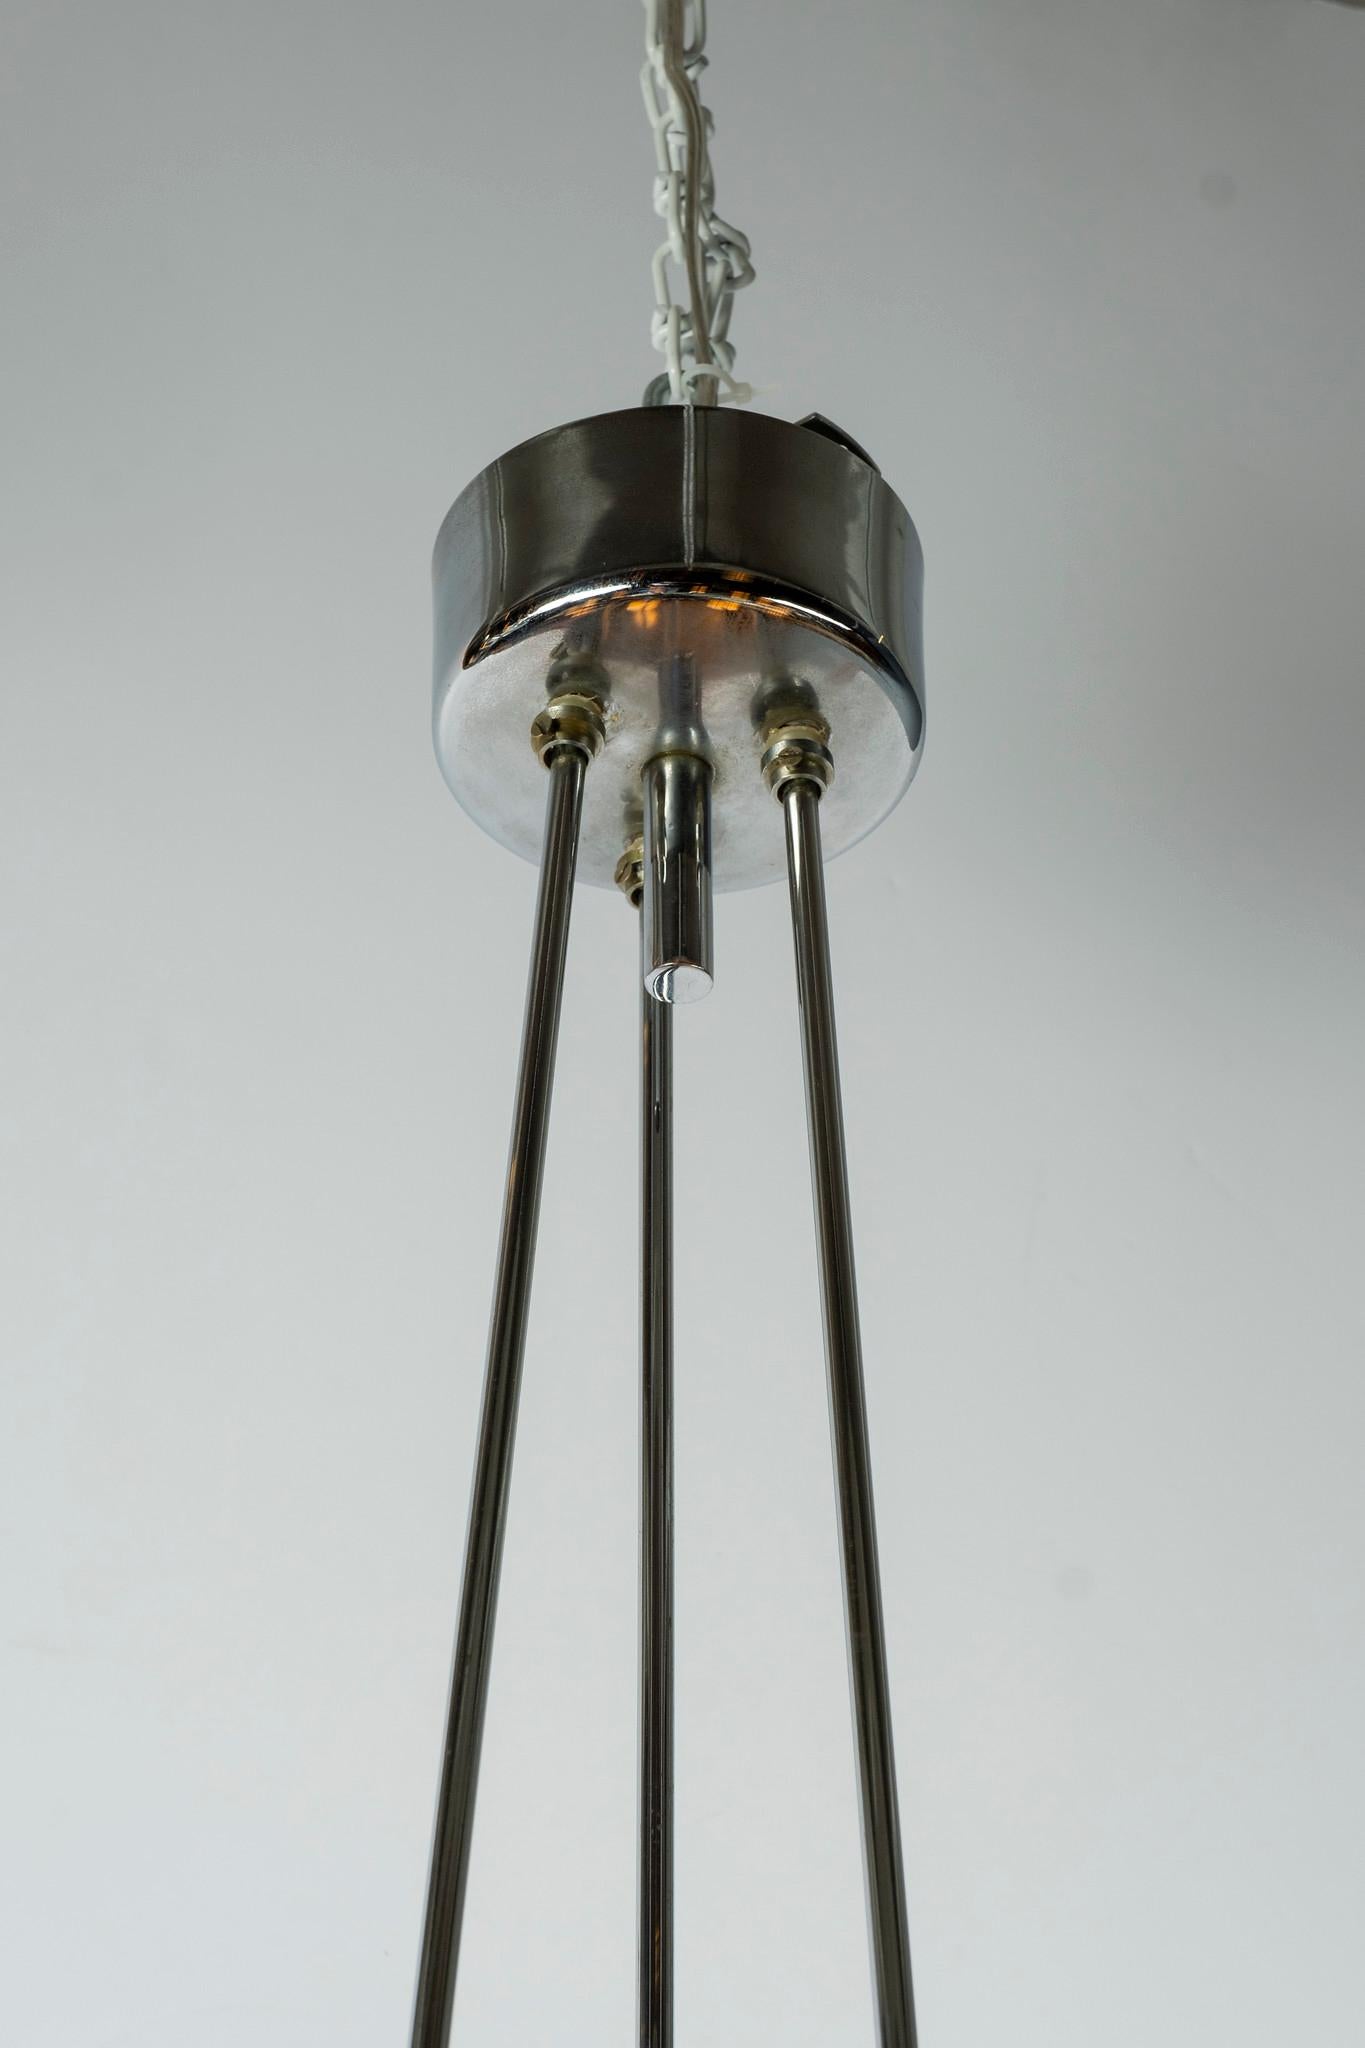 A vintage chrome and smoke glass chandelier from Italy.